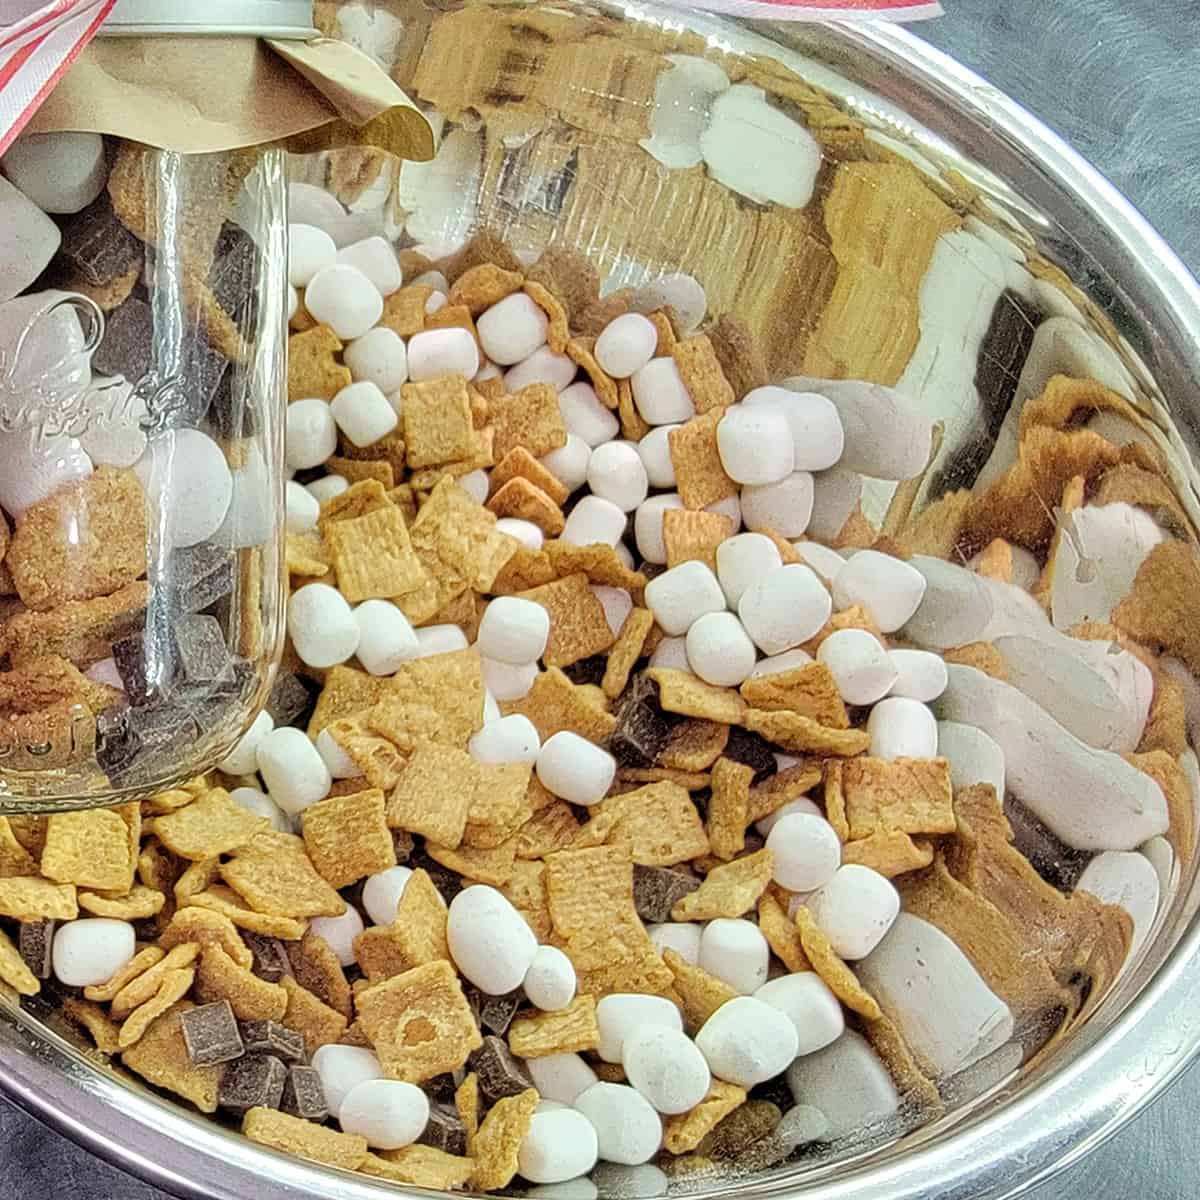 Crunchy s'more mix in a stainless steel bowl.